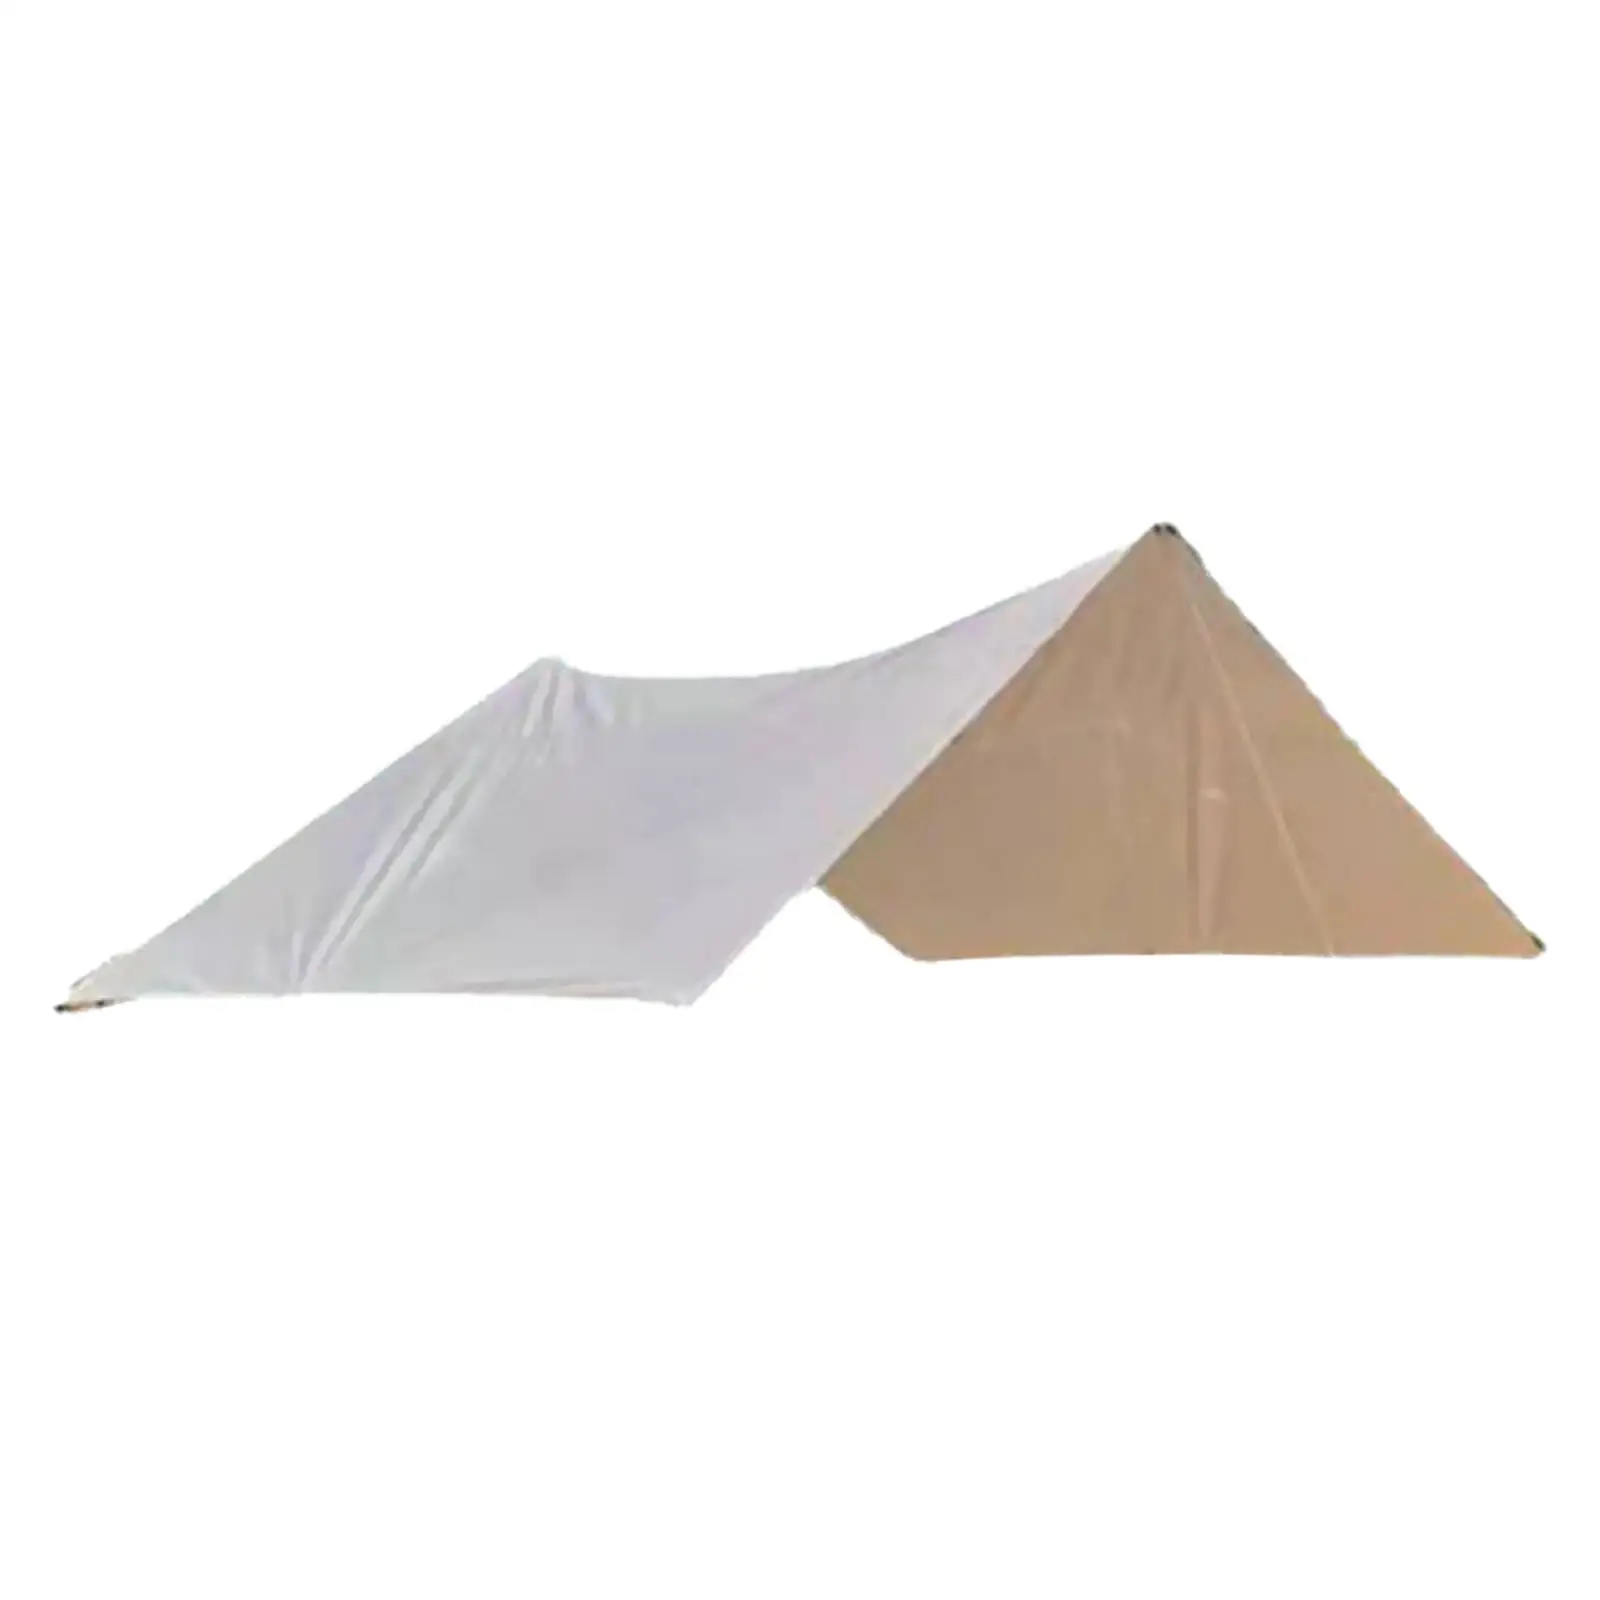 Portable Camping Tent Tarp Awning for Outdoor Backyard Traveling